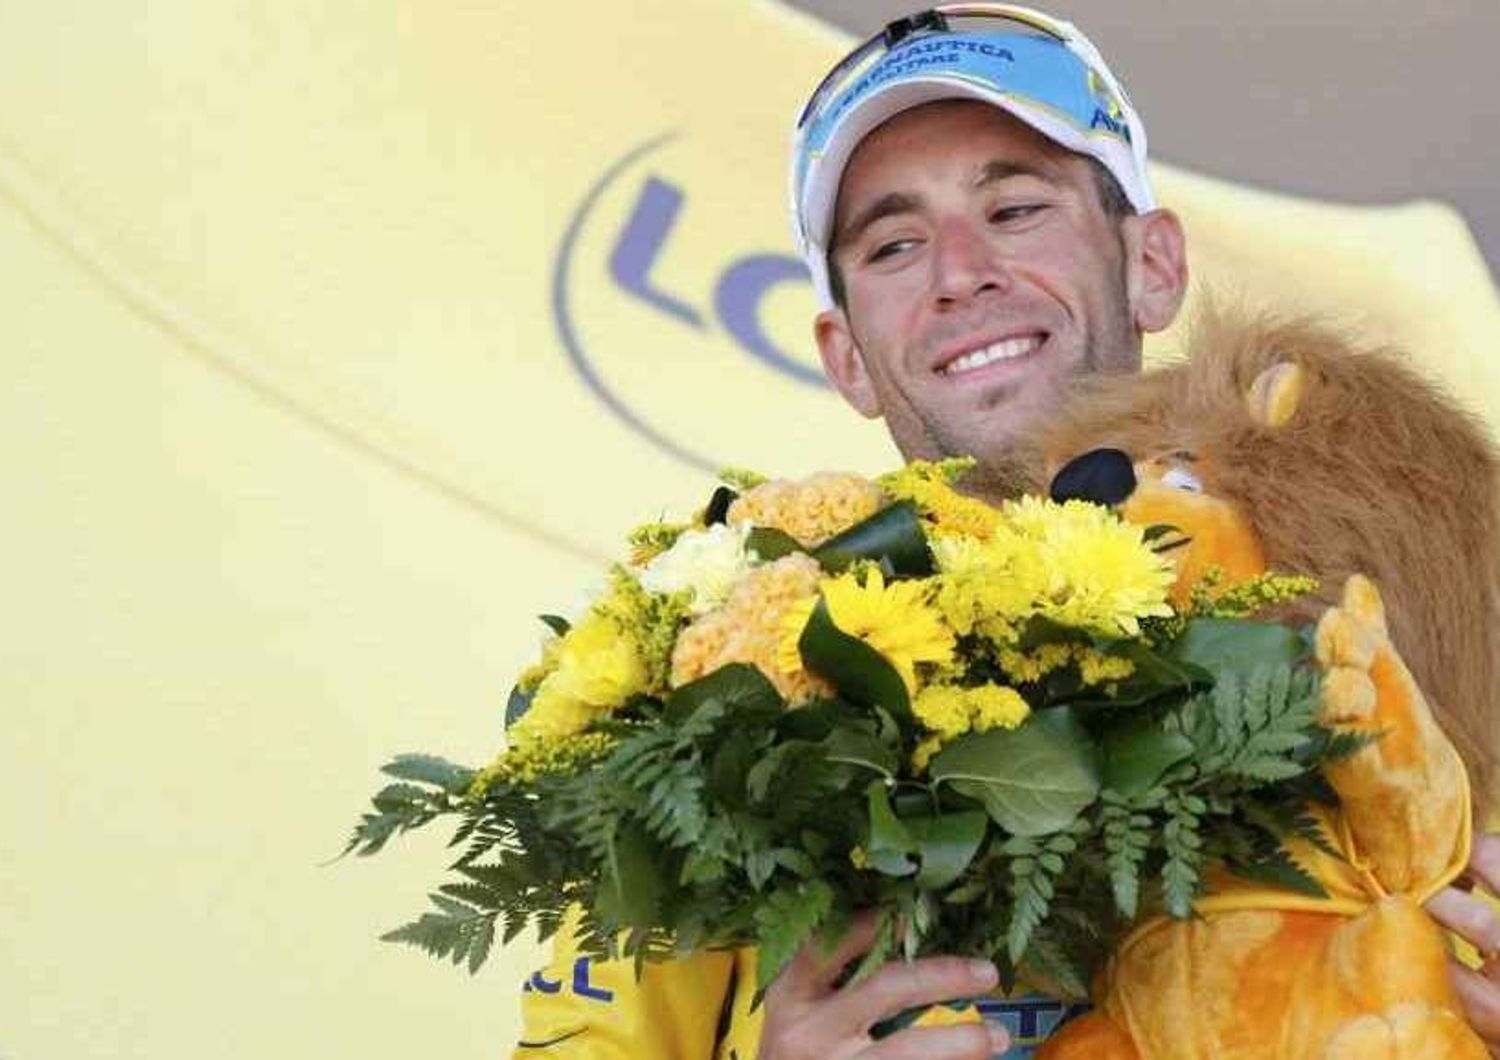 Cycling: Vincenzo Nibali wins 13th stage of Tour de France